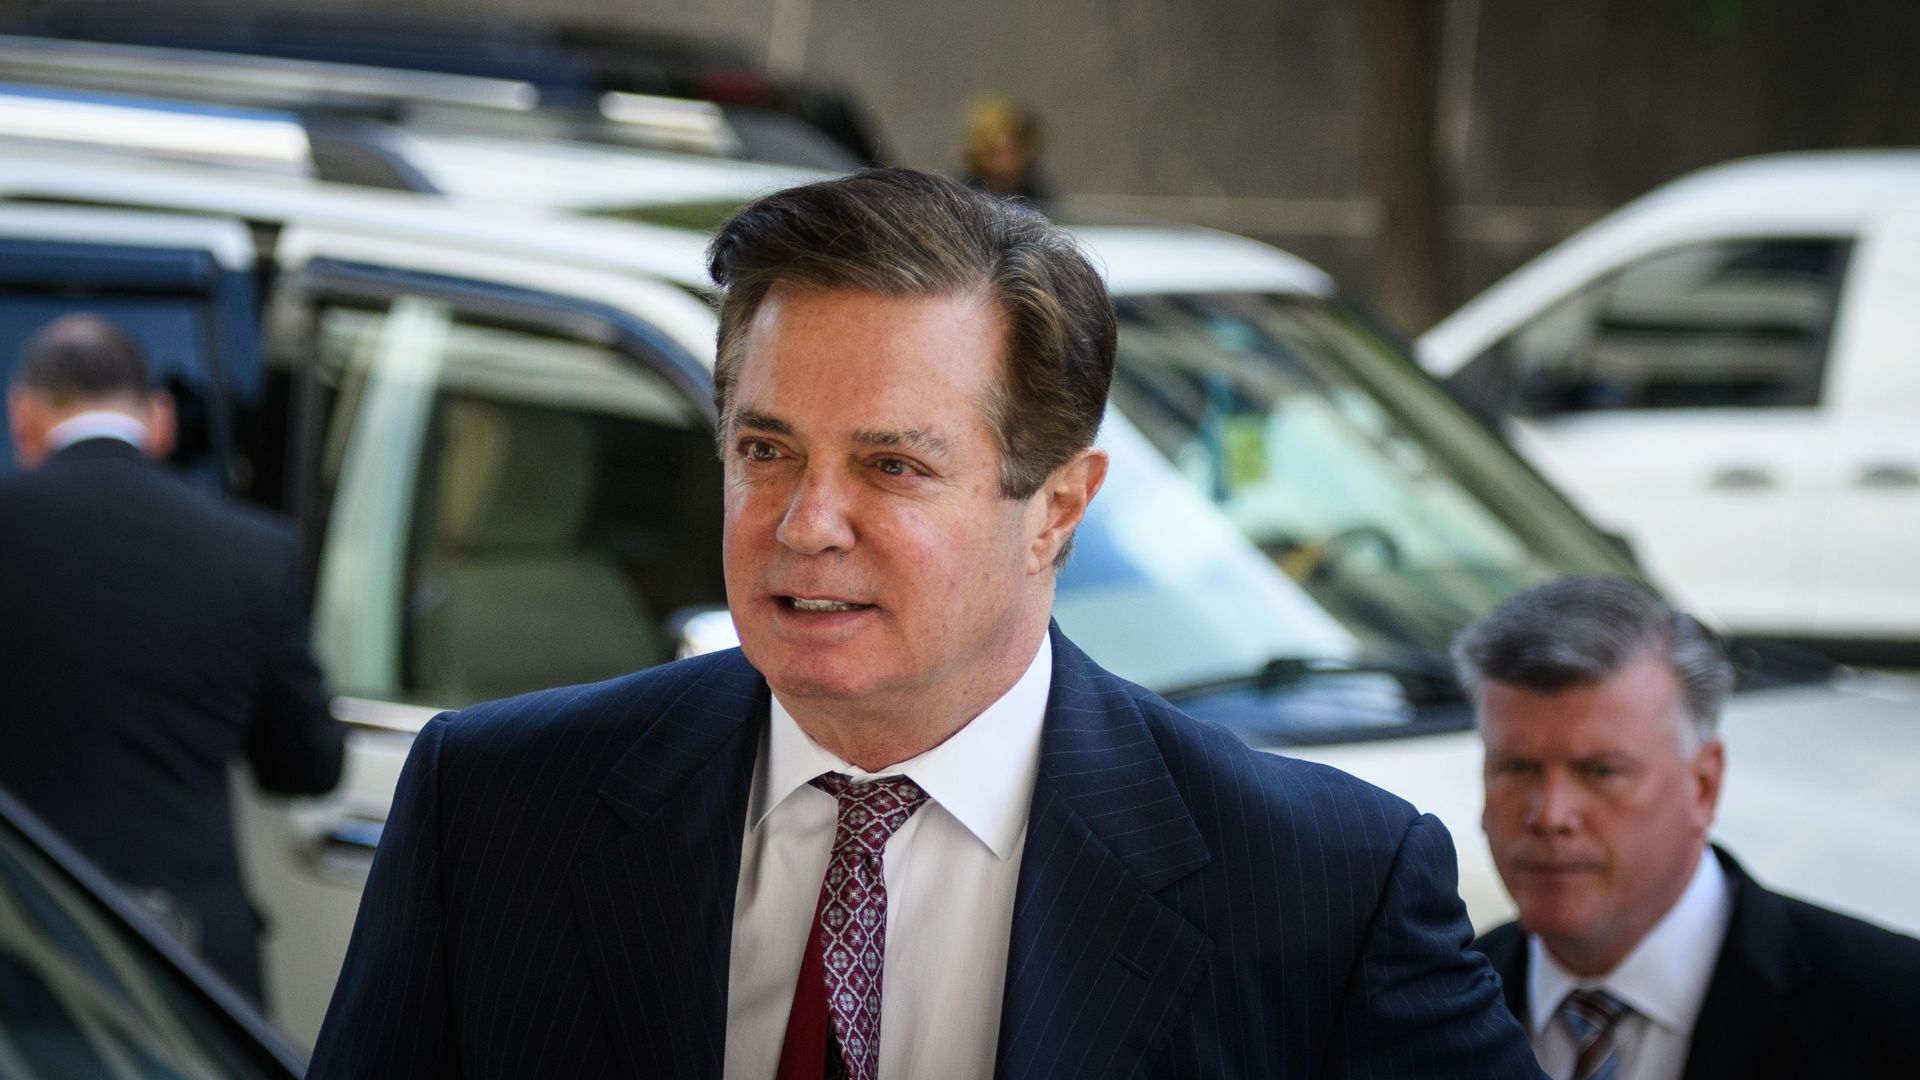 Photo of Paul Manafort in a suit